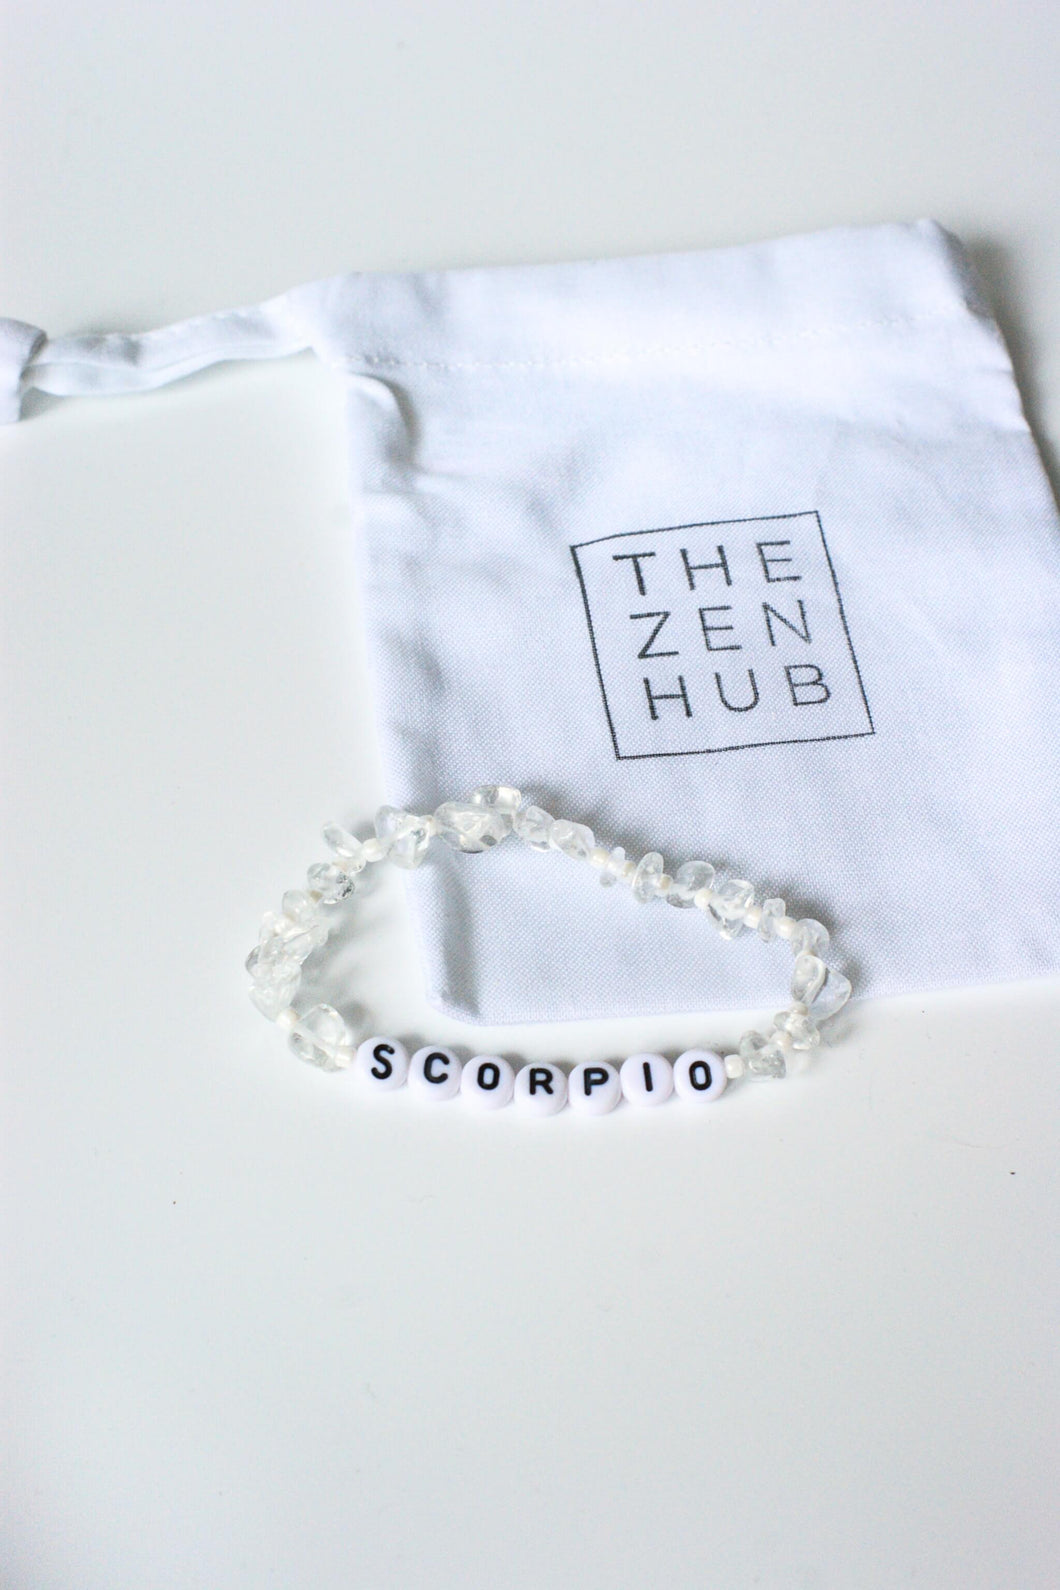 Scorpio crystal bracelet made from clear quartz on white cotton bag